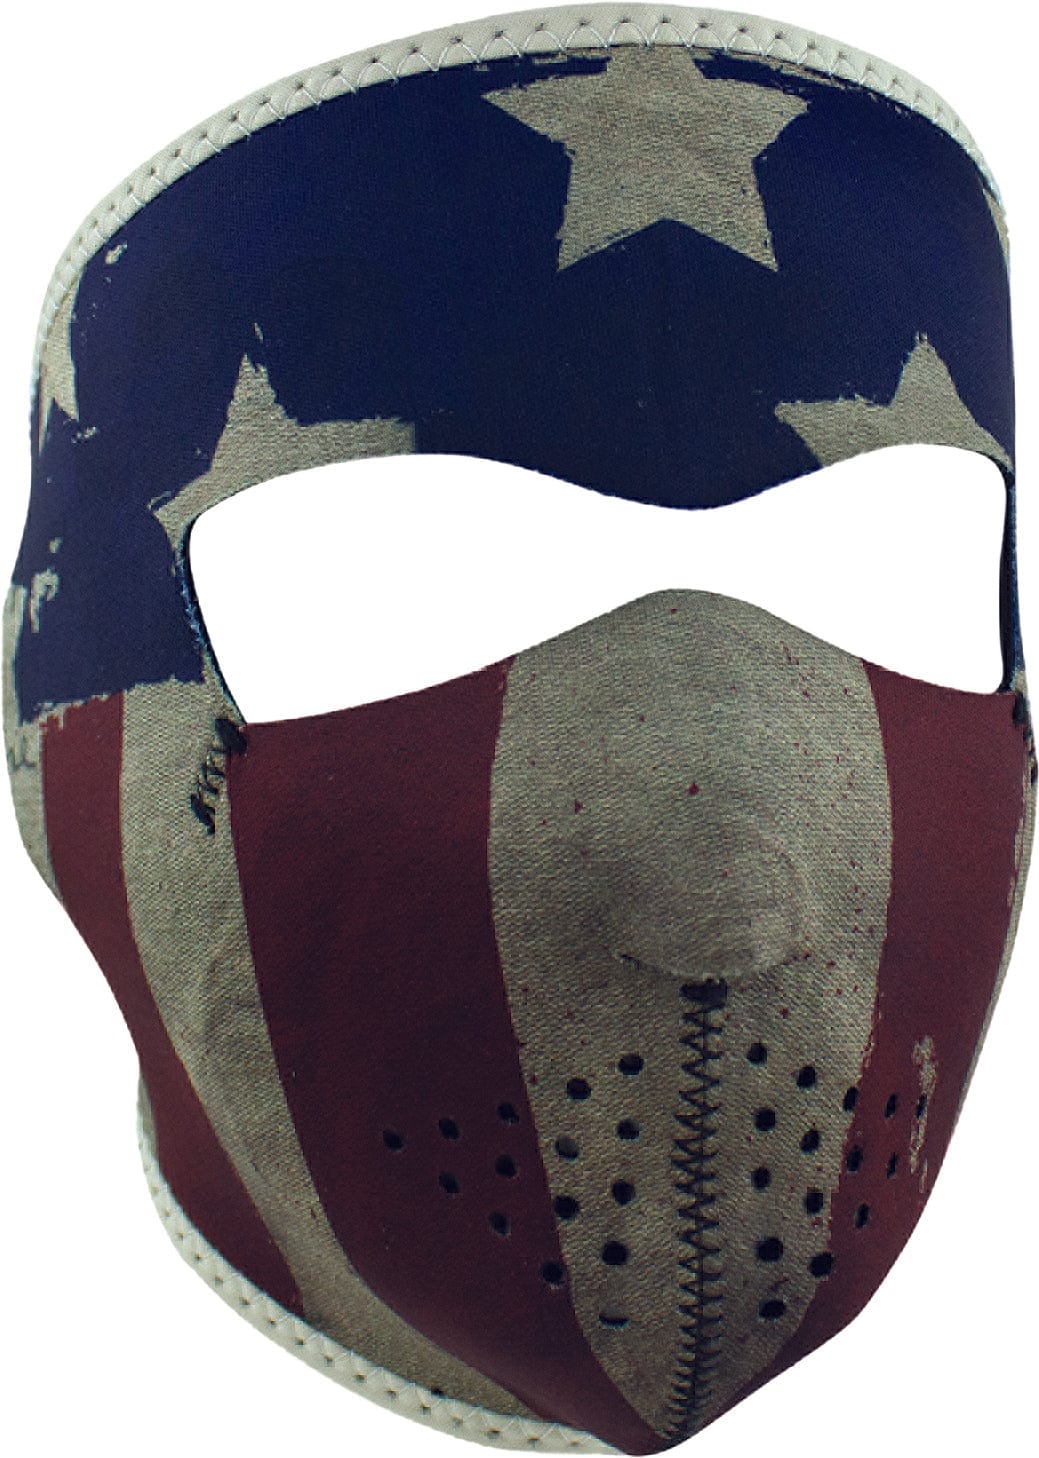 Western Powersports Facemask Patriot Full Face Mask by Zan WNFM408